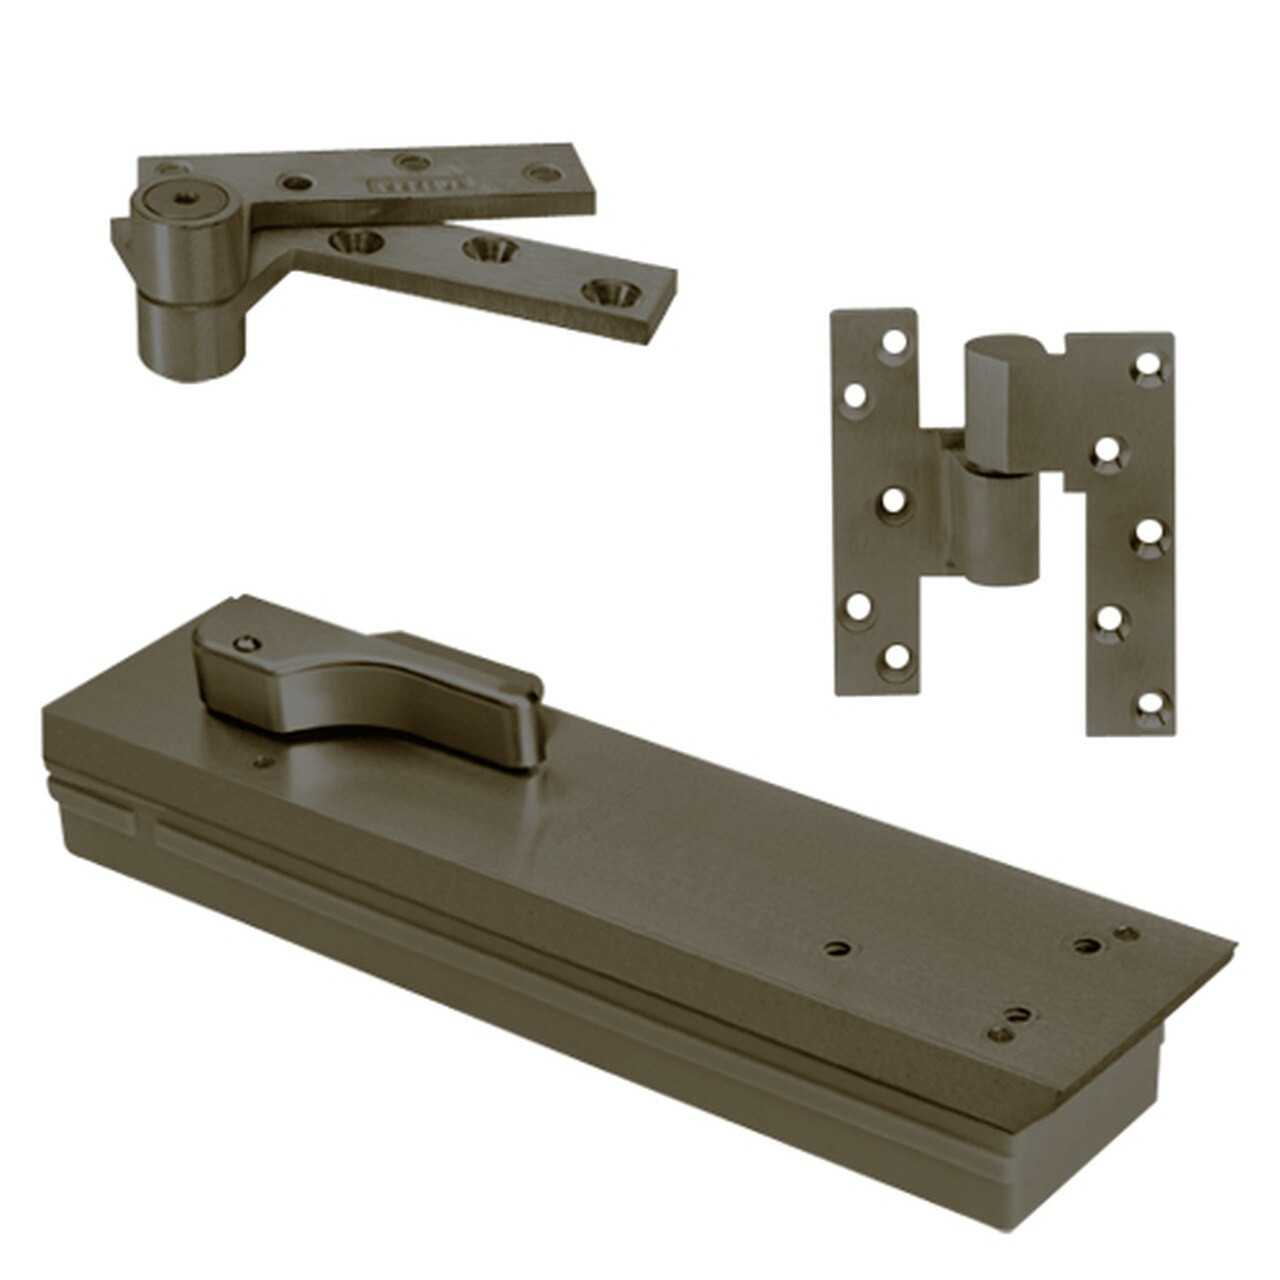 FQ5103NBC-LCC-LH-613 Rixson Q51 Series Fire Rated 3/4" Offset Hung Shallow Depth Floor Closers in Dark Bronze Finish